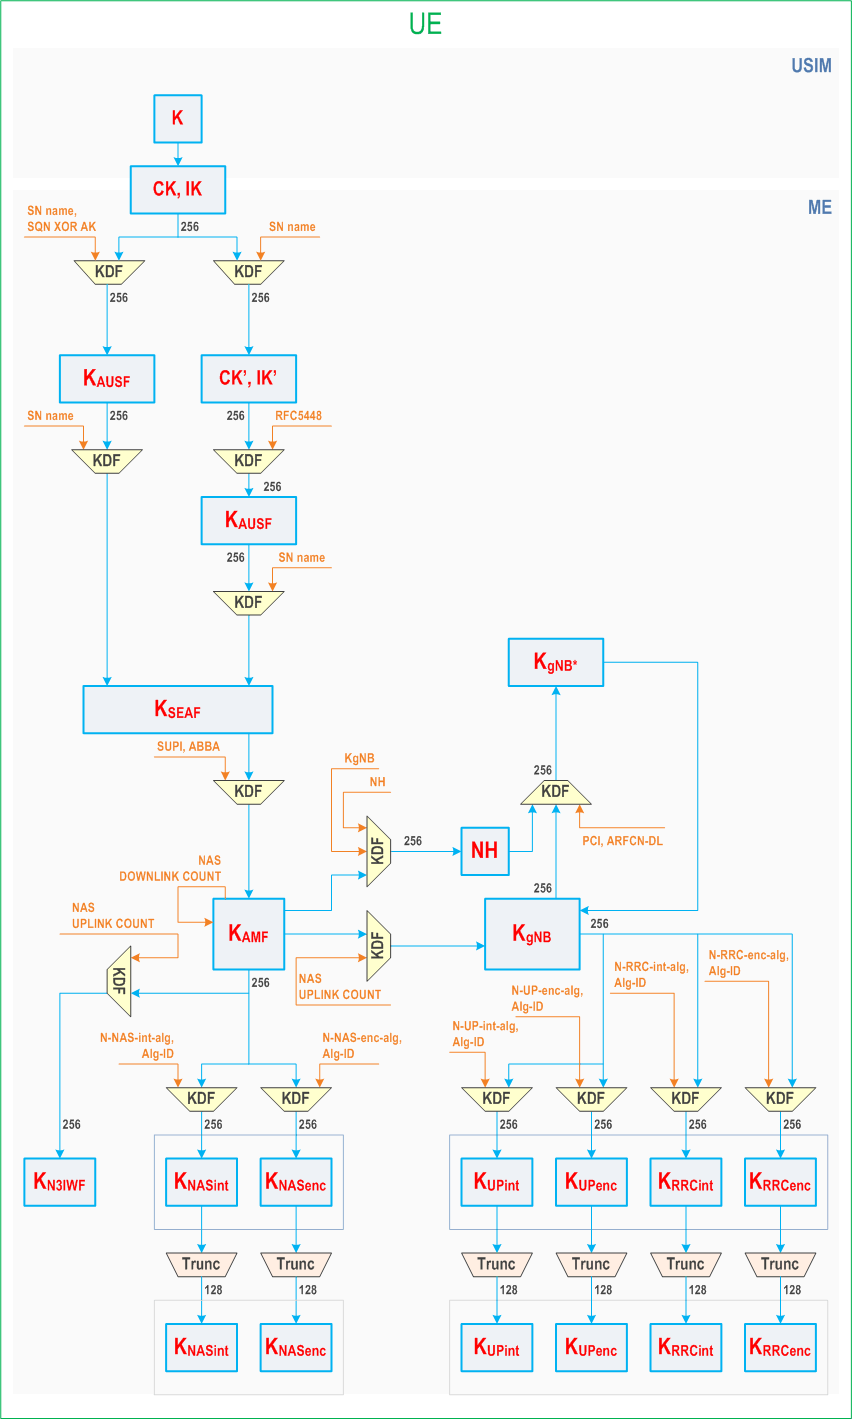 Reproduction of 3GPP TS 33.501, Fig. 6.2.2-2: Key distribution and key derivation scheme for 5G for the UE